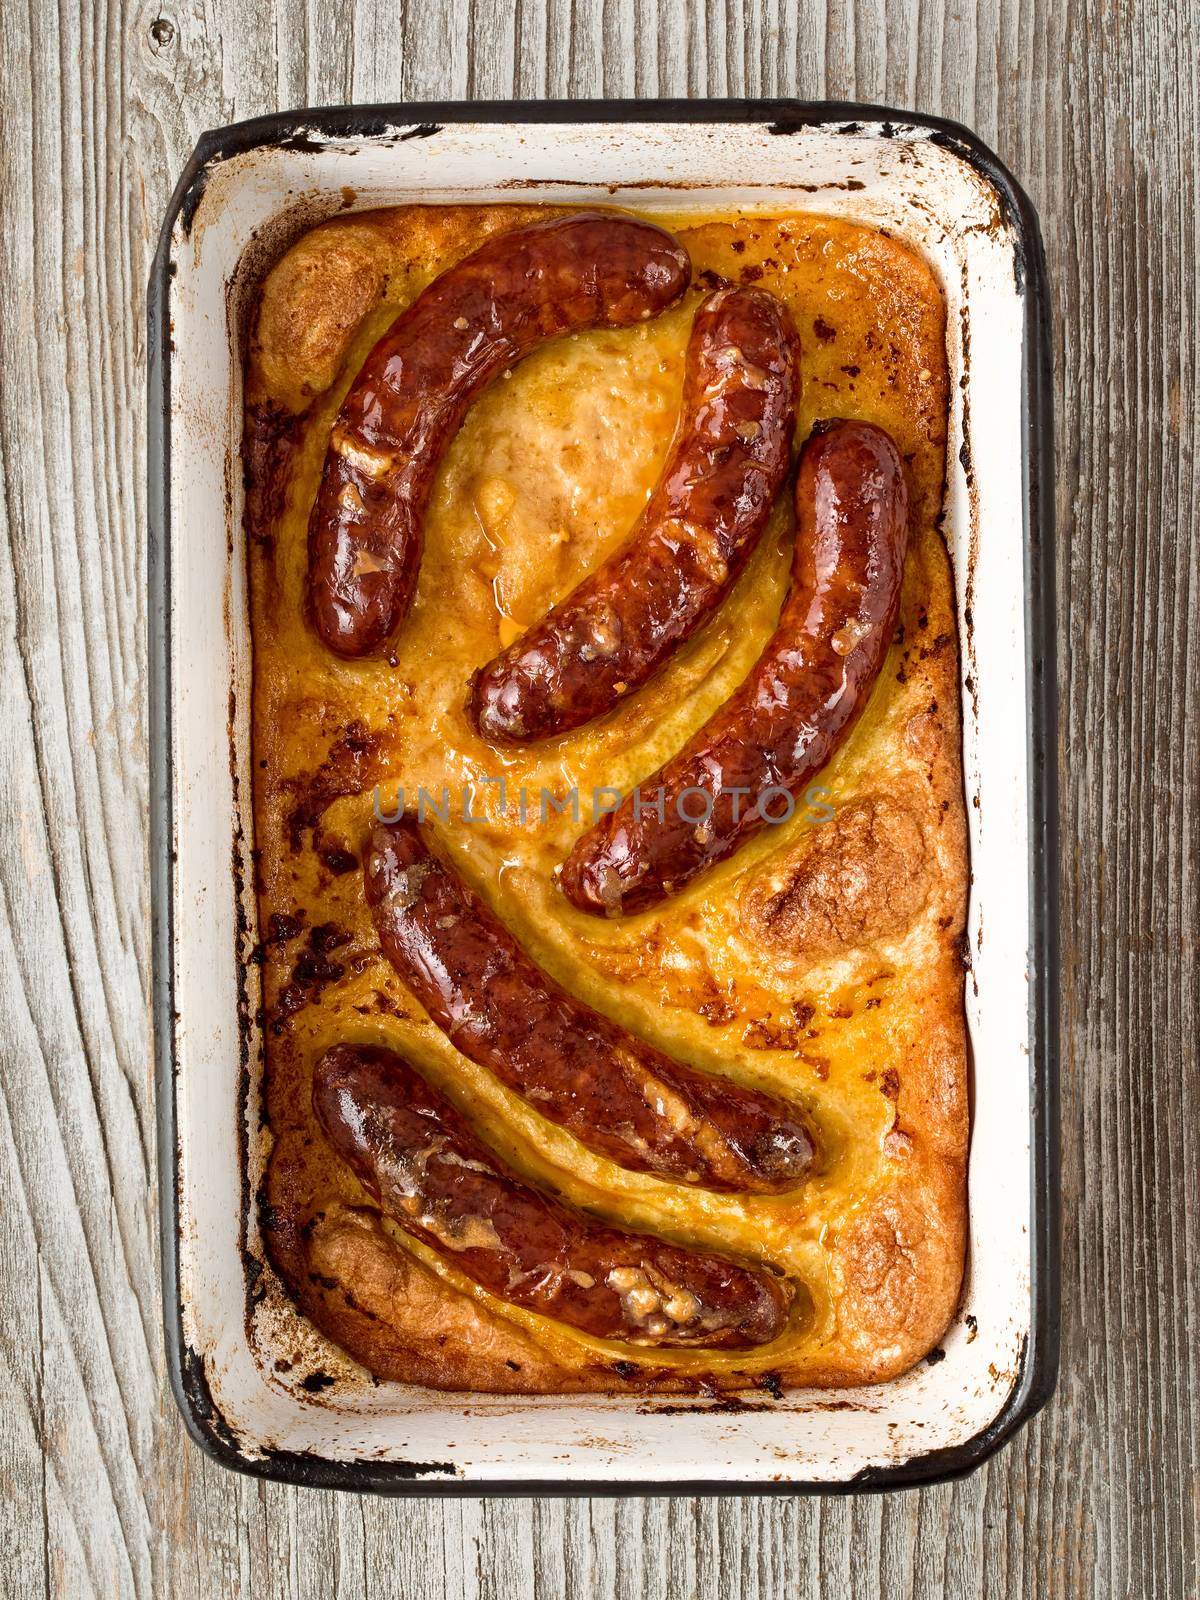 rustic english pub grub toad in the hole by zkruger